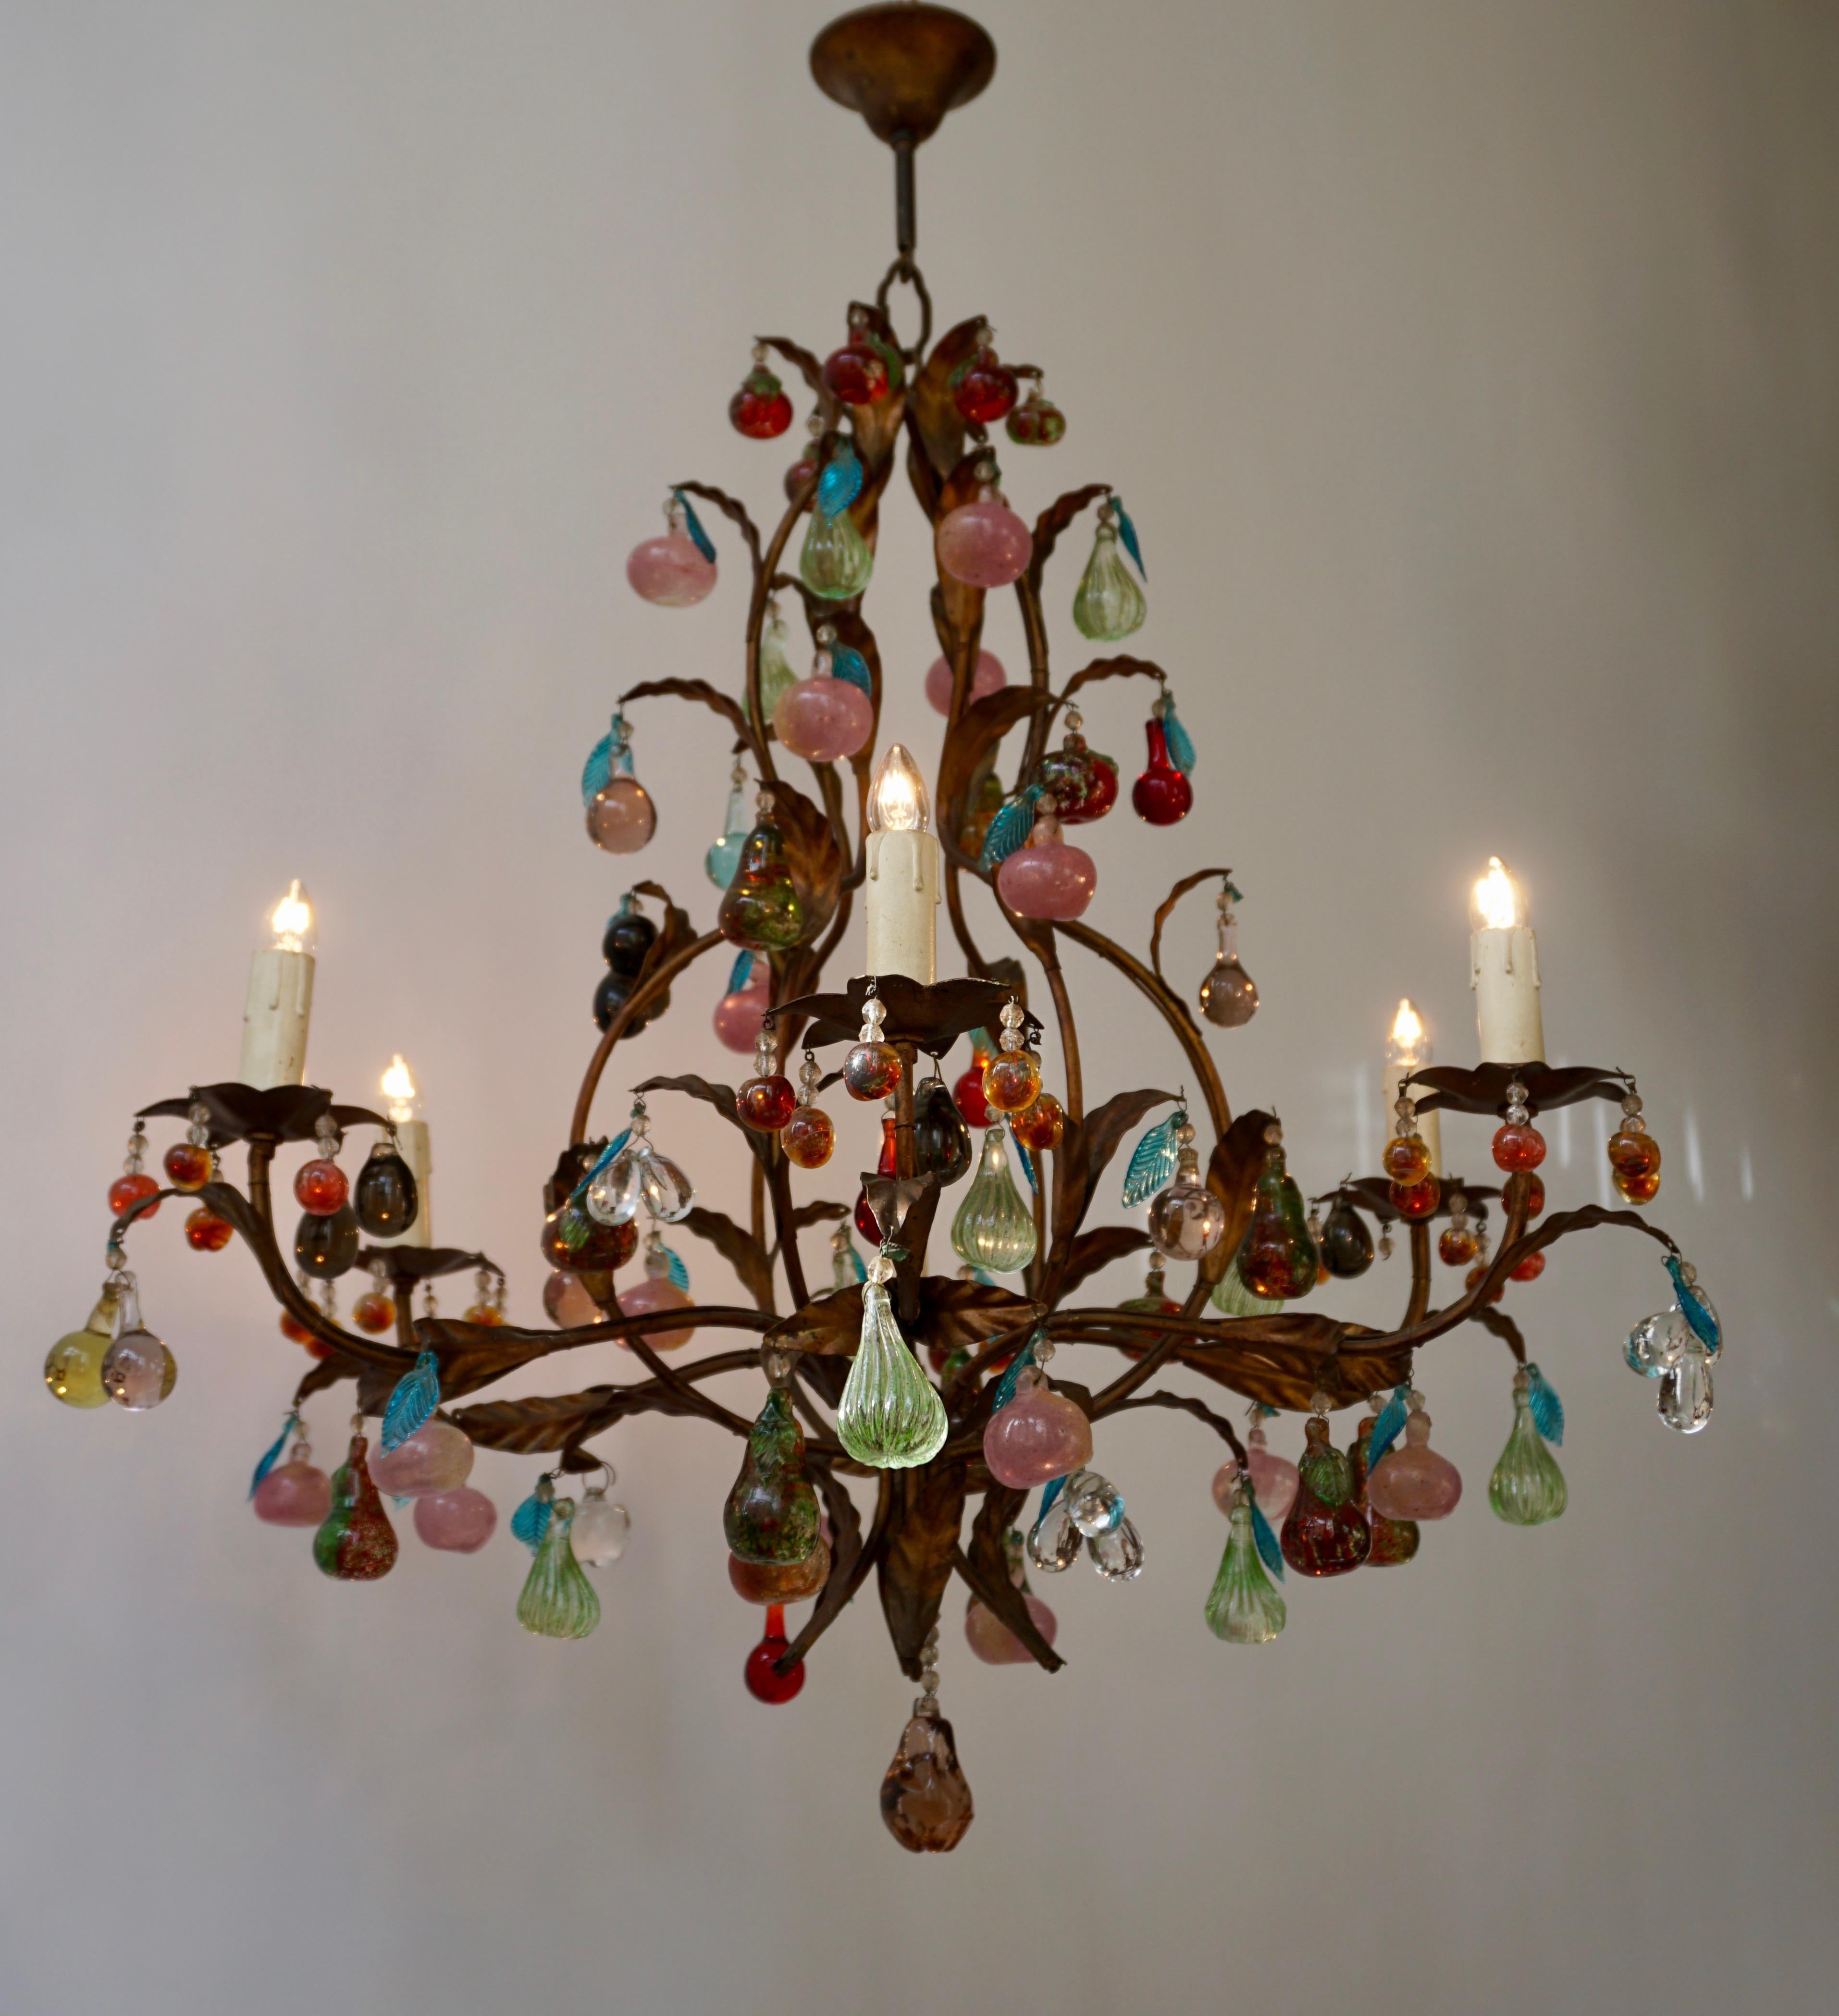 Charming Italian brass and Murano glass chandelier embellished with fruit pendants and drops in colored glass.
The different fruits, like grapes, pears and apples, in solid Murano glass are and also the molded leaves present sumptuous colors.